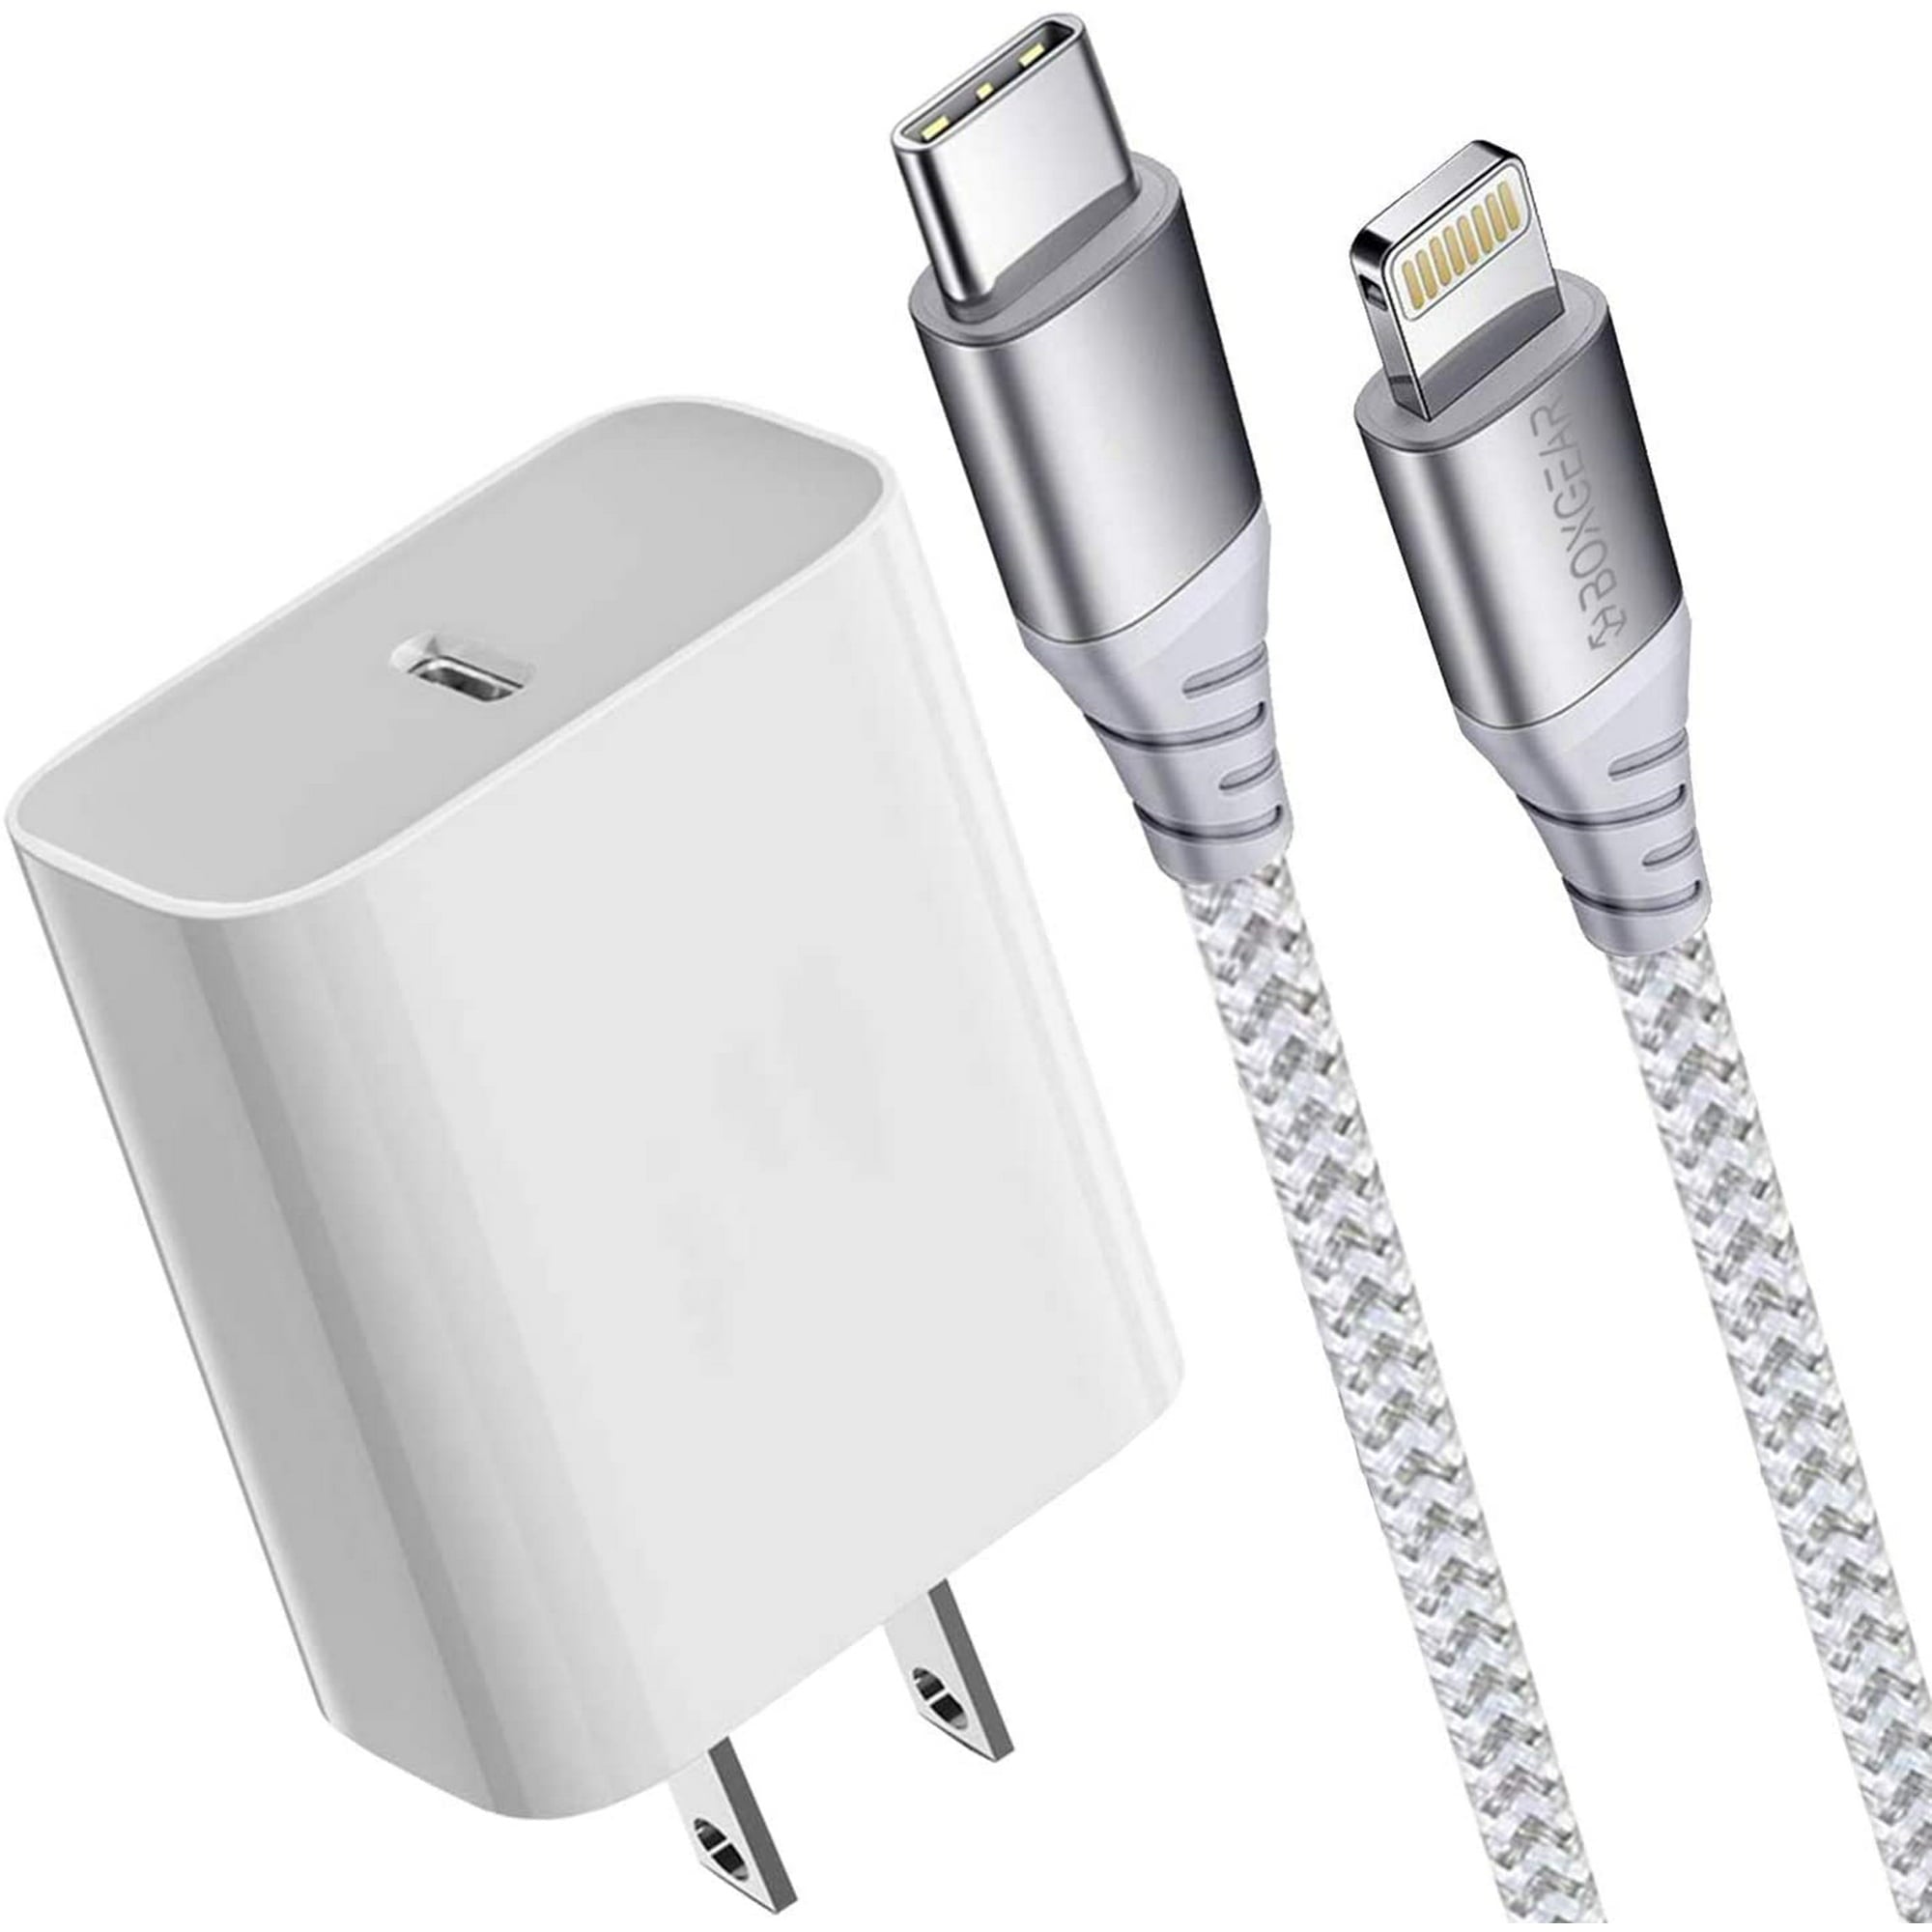 BoxGear iPhone Fast Charger Apple MFI Certified 18W PD Type C Wall Charger with 10ft. Charging Cable for iPhone 13/13 Pro Max/12/12 Mini/12 Pro/12 Pro Max/11/11 Pro/ 11/XS Max/XR/X, iPad, Air Pods Pro